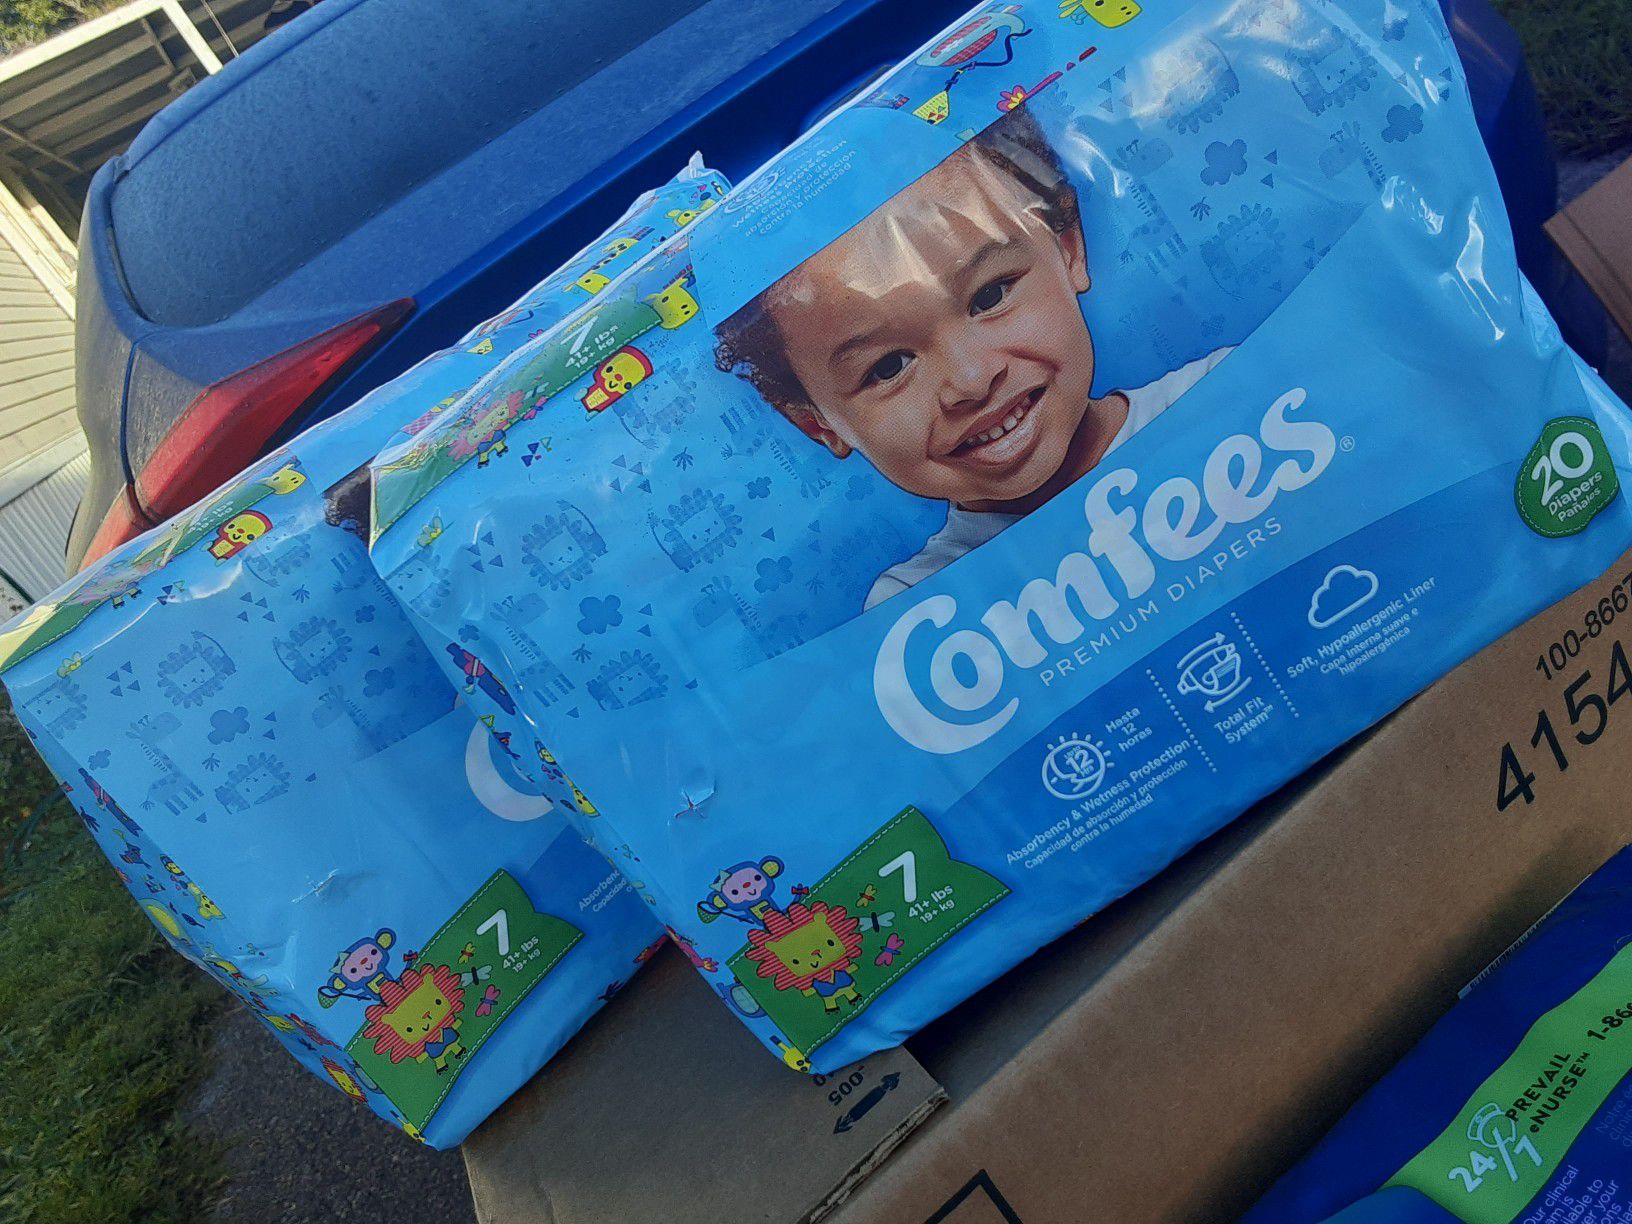 Comfees diapers for boys or unisex